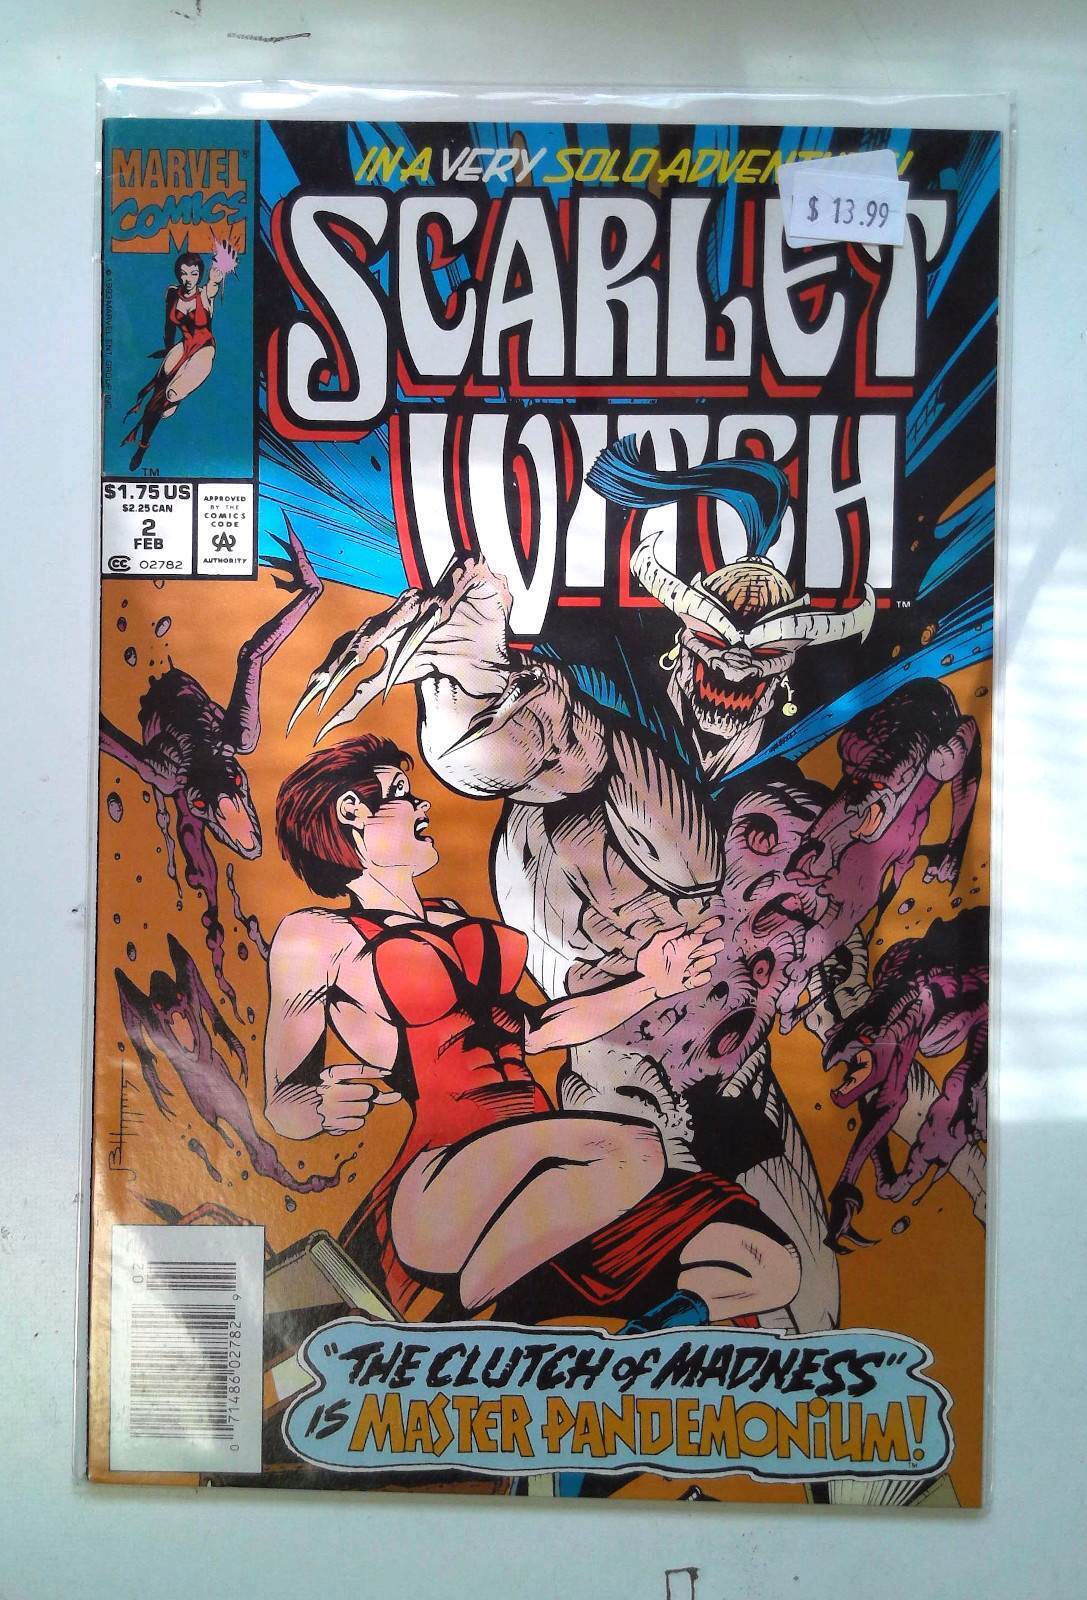 1994 Scarlet Witch #2 Marvel Comics VF/NM Newsstand 1st Print Comic Book